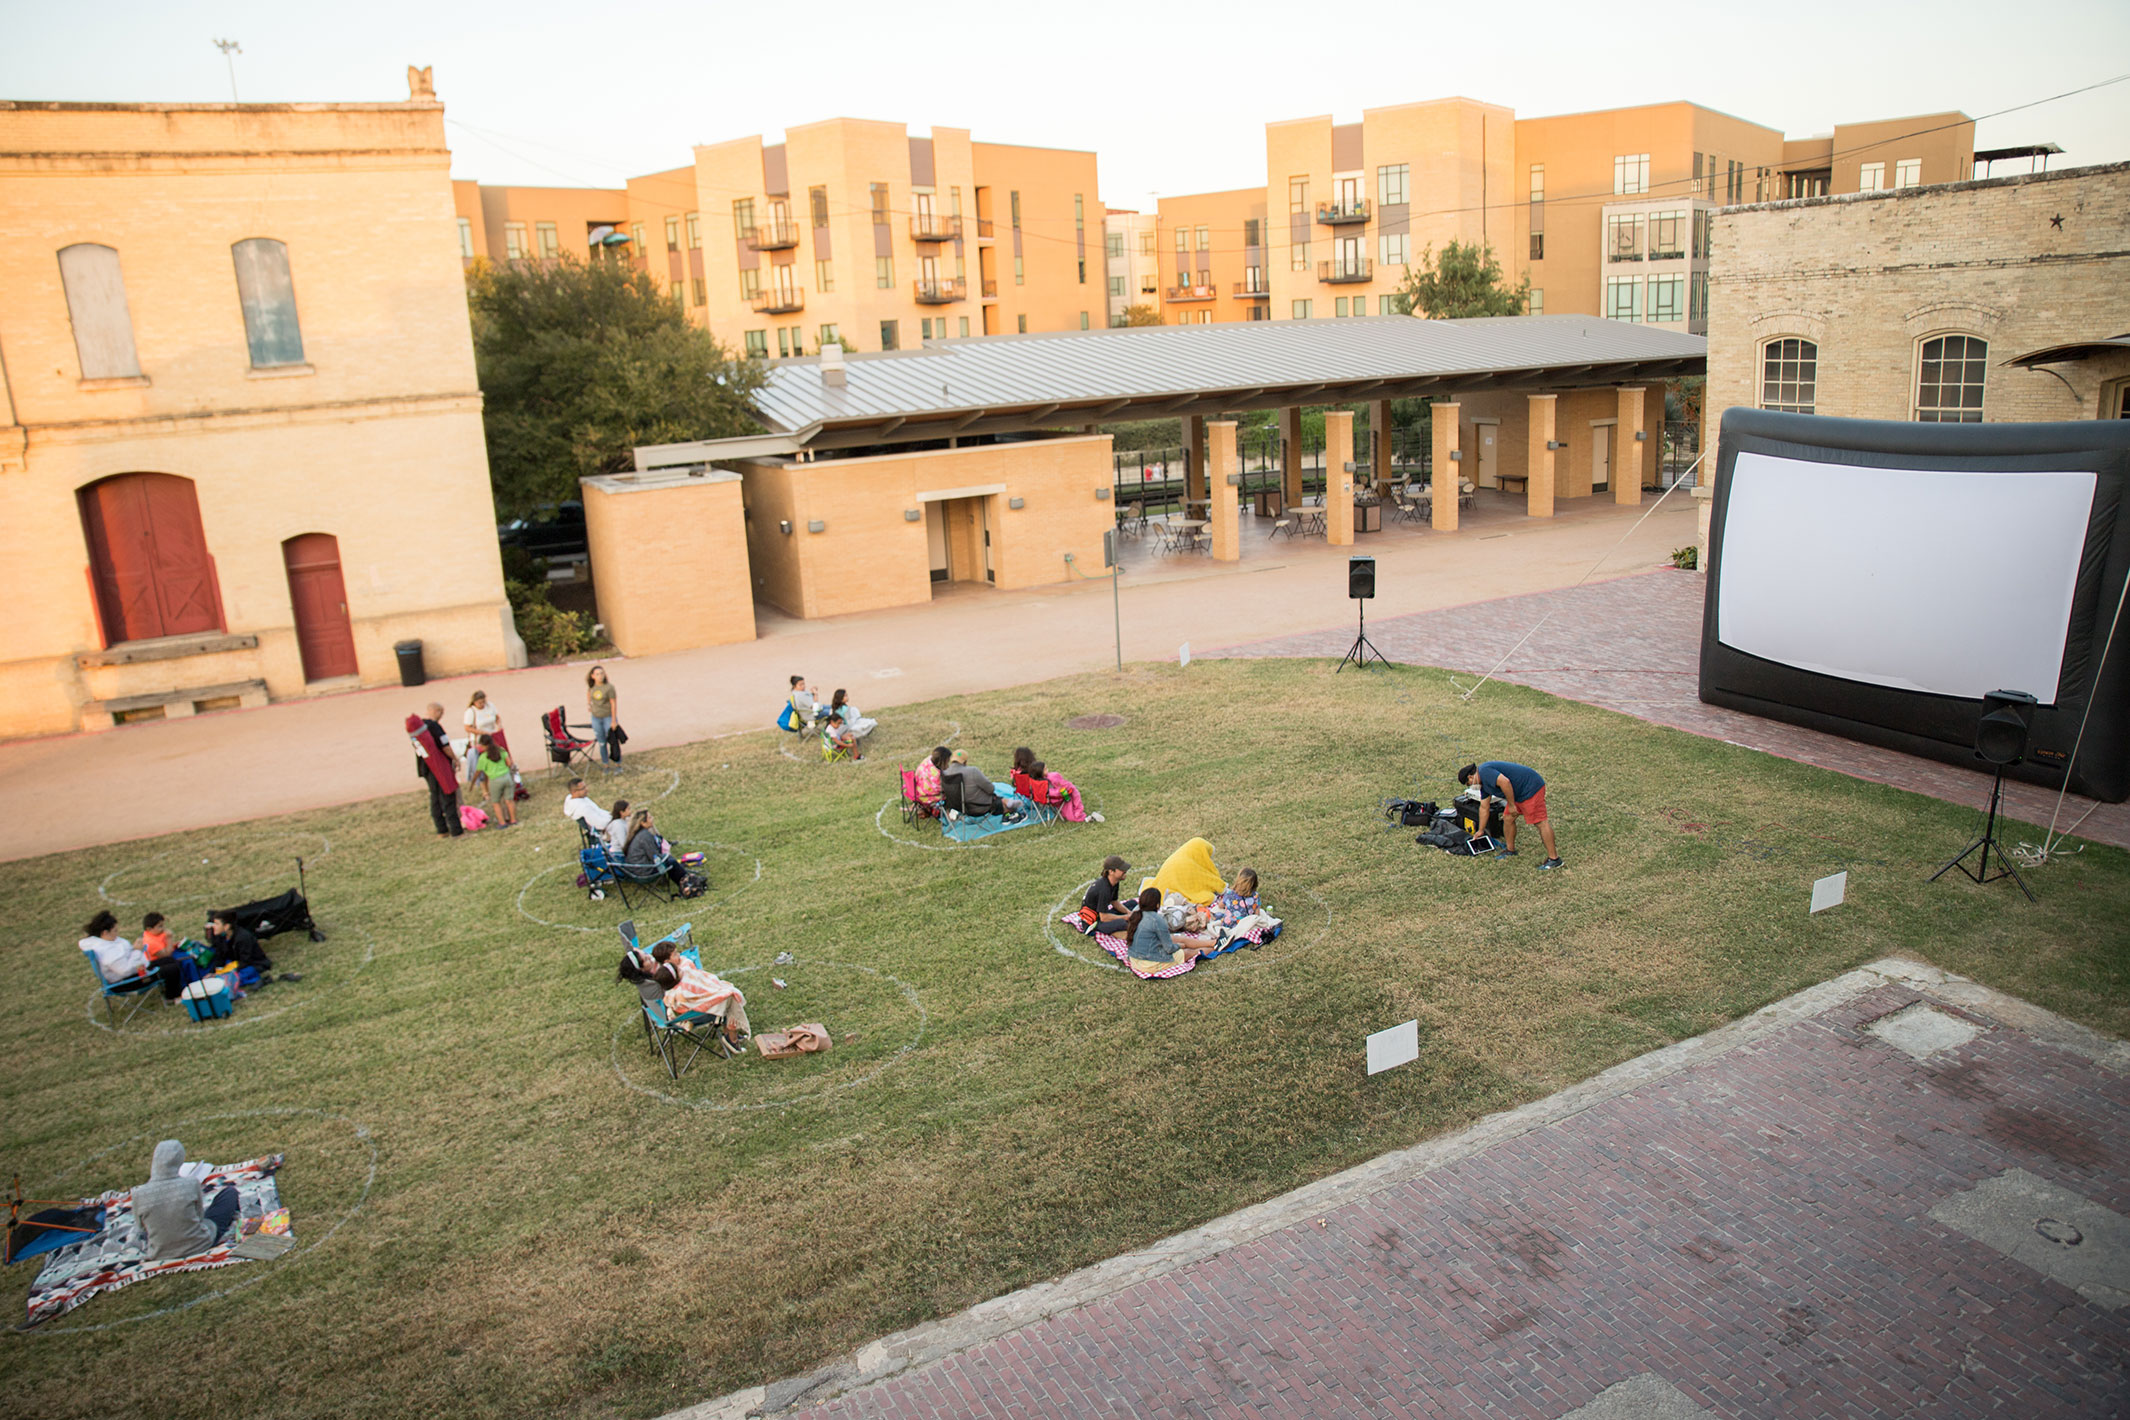 Guests viewing a movie on the west courtyard